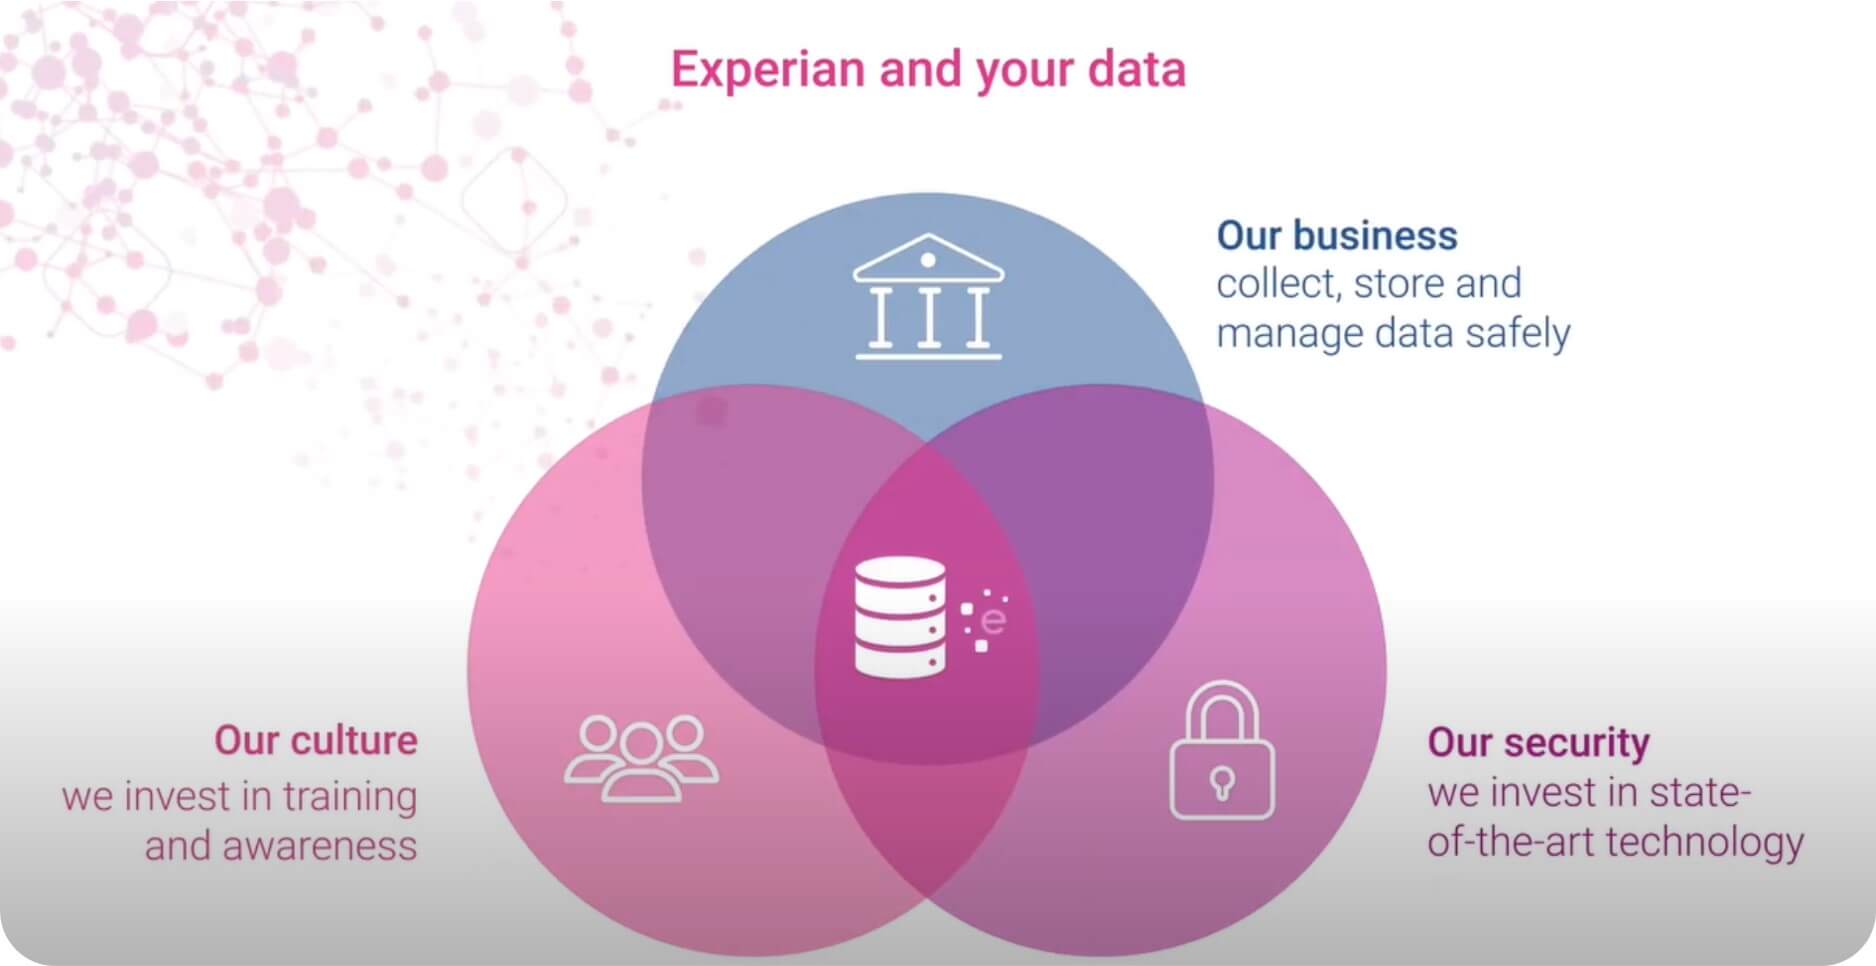 Experian Credit Bureau South Africa data is the lifeblood of our business